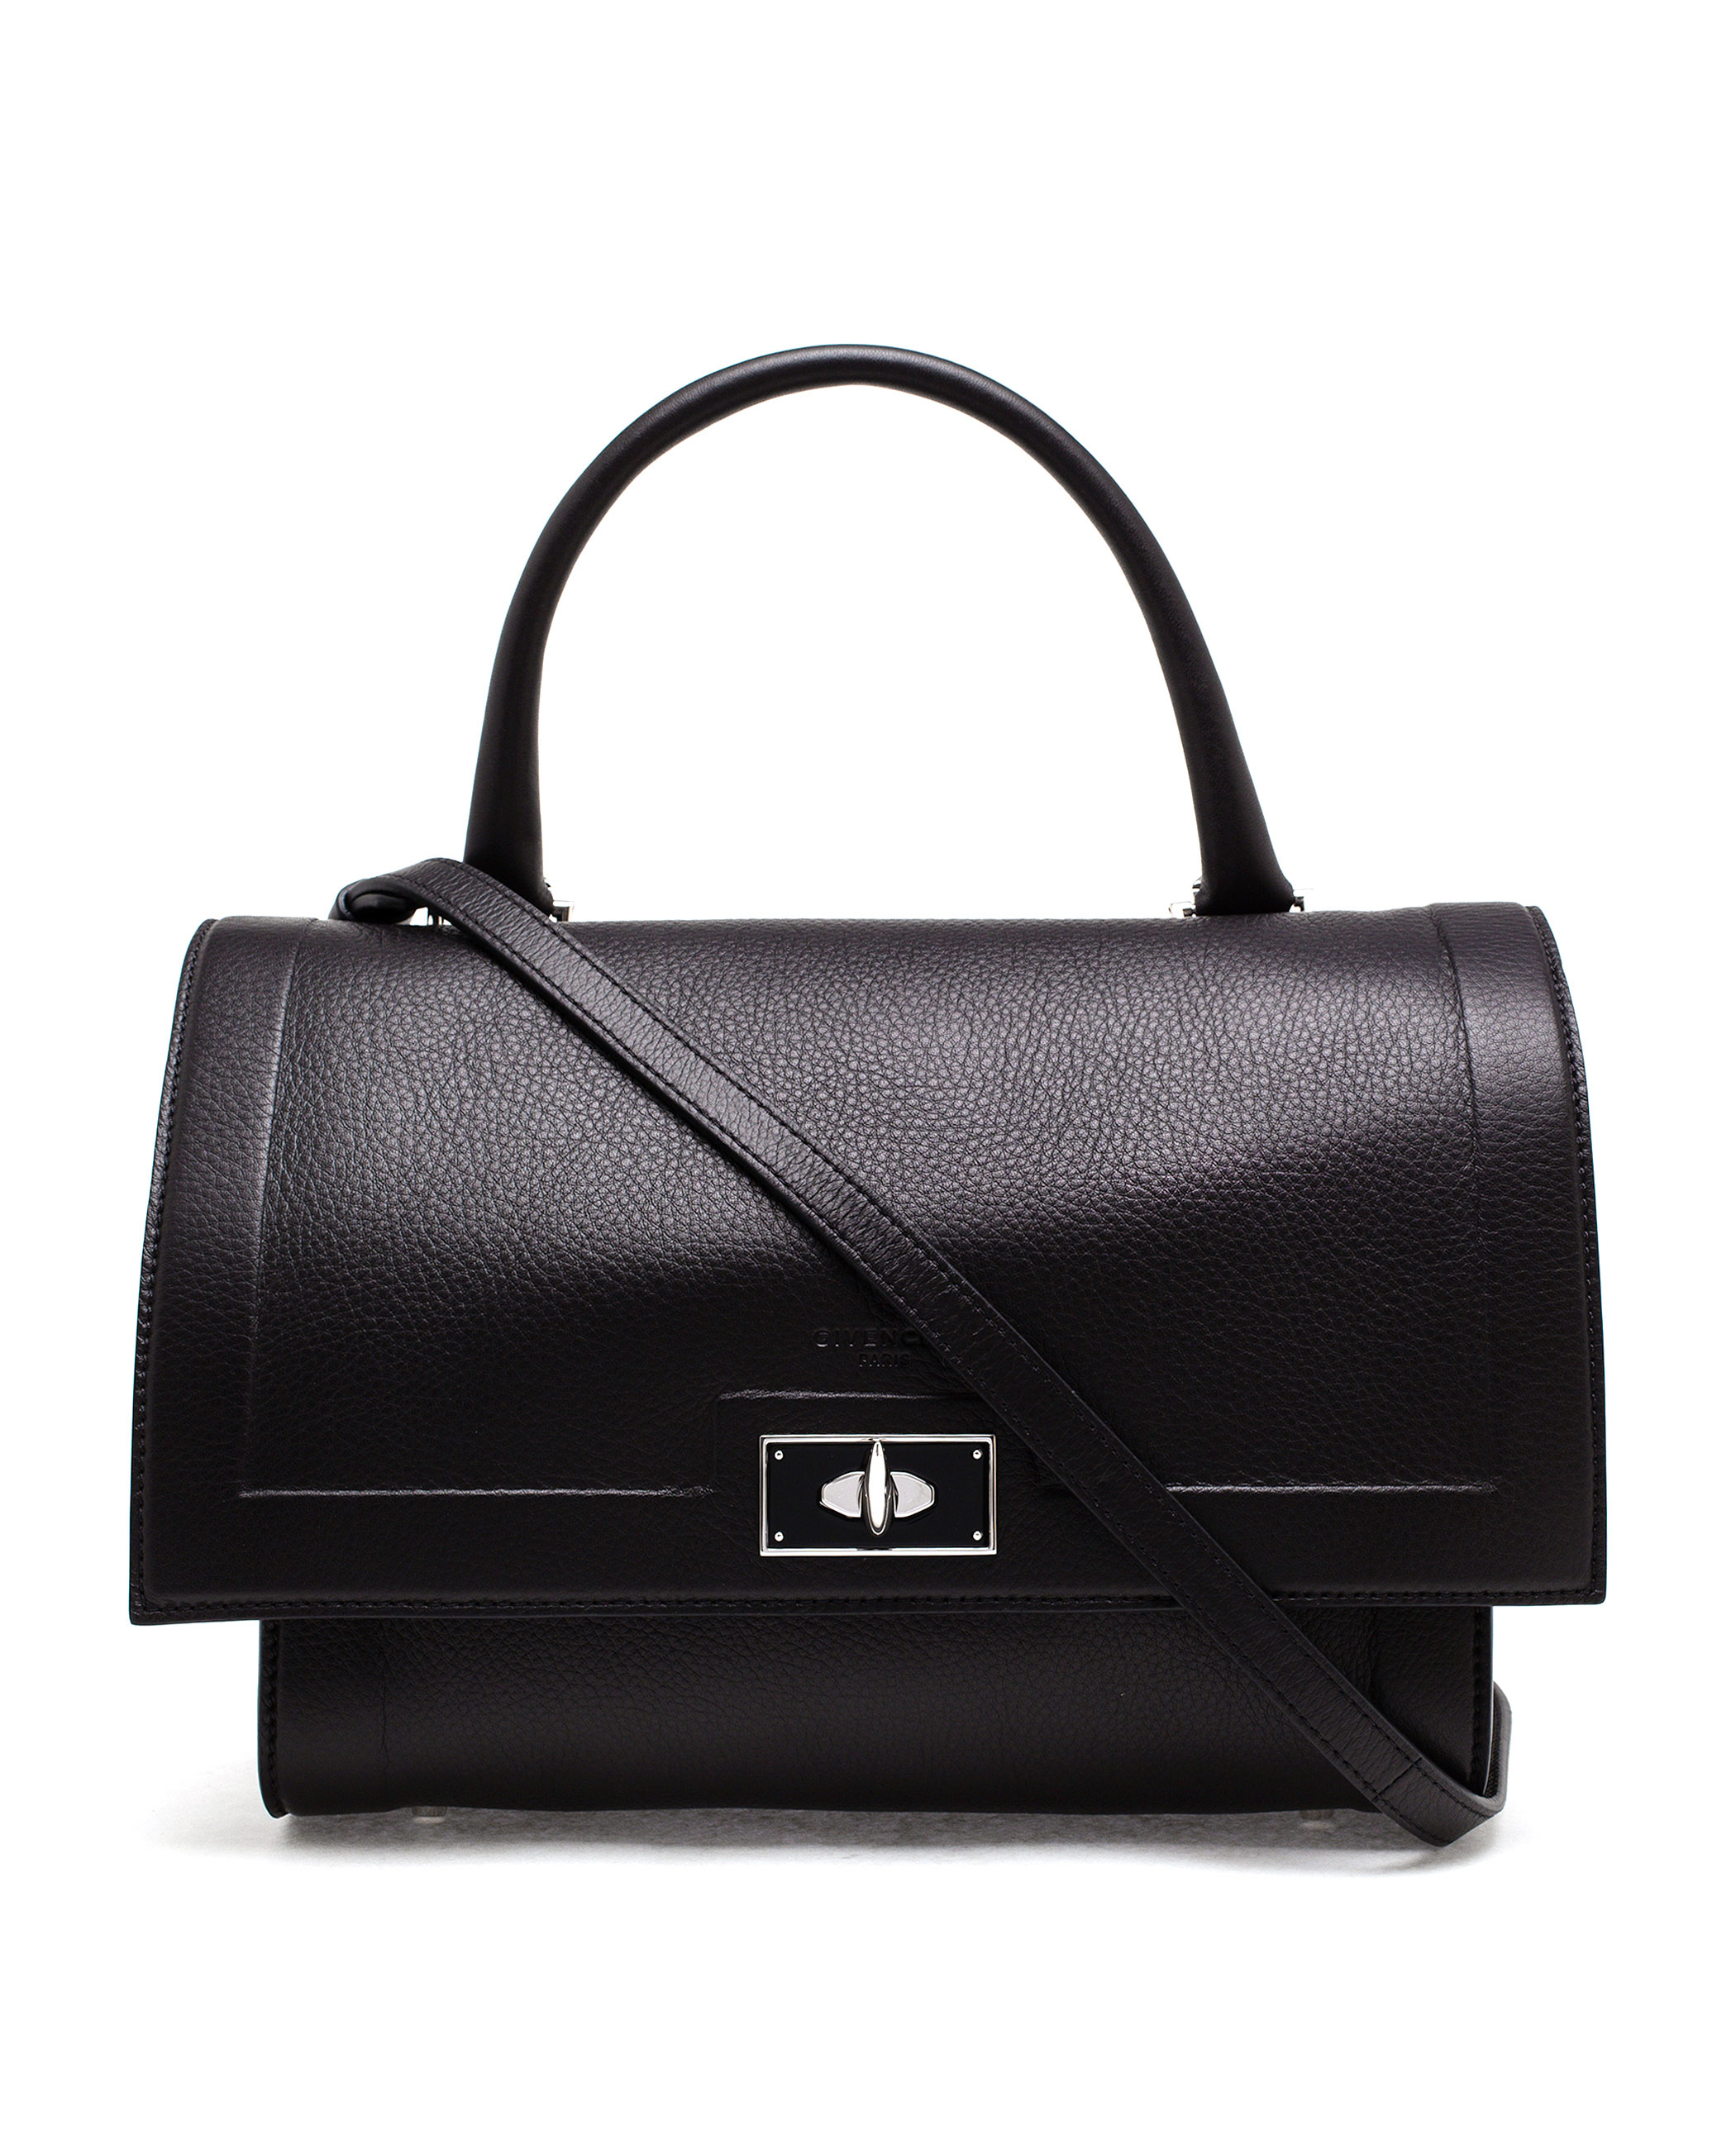 Lyst - Givenchy Small Shark Bag in Black